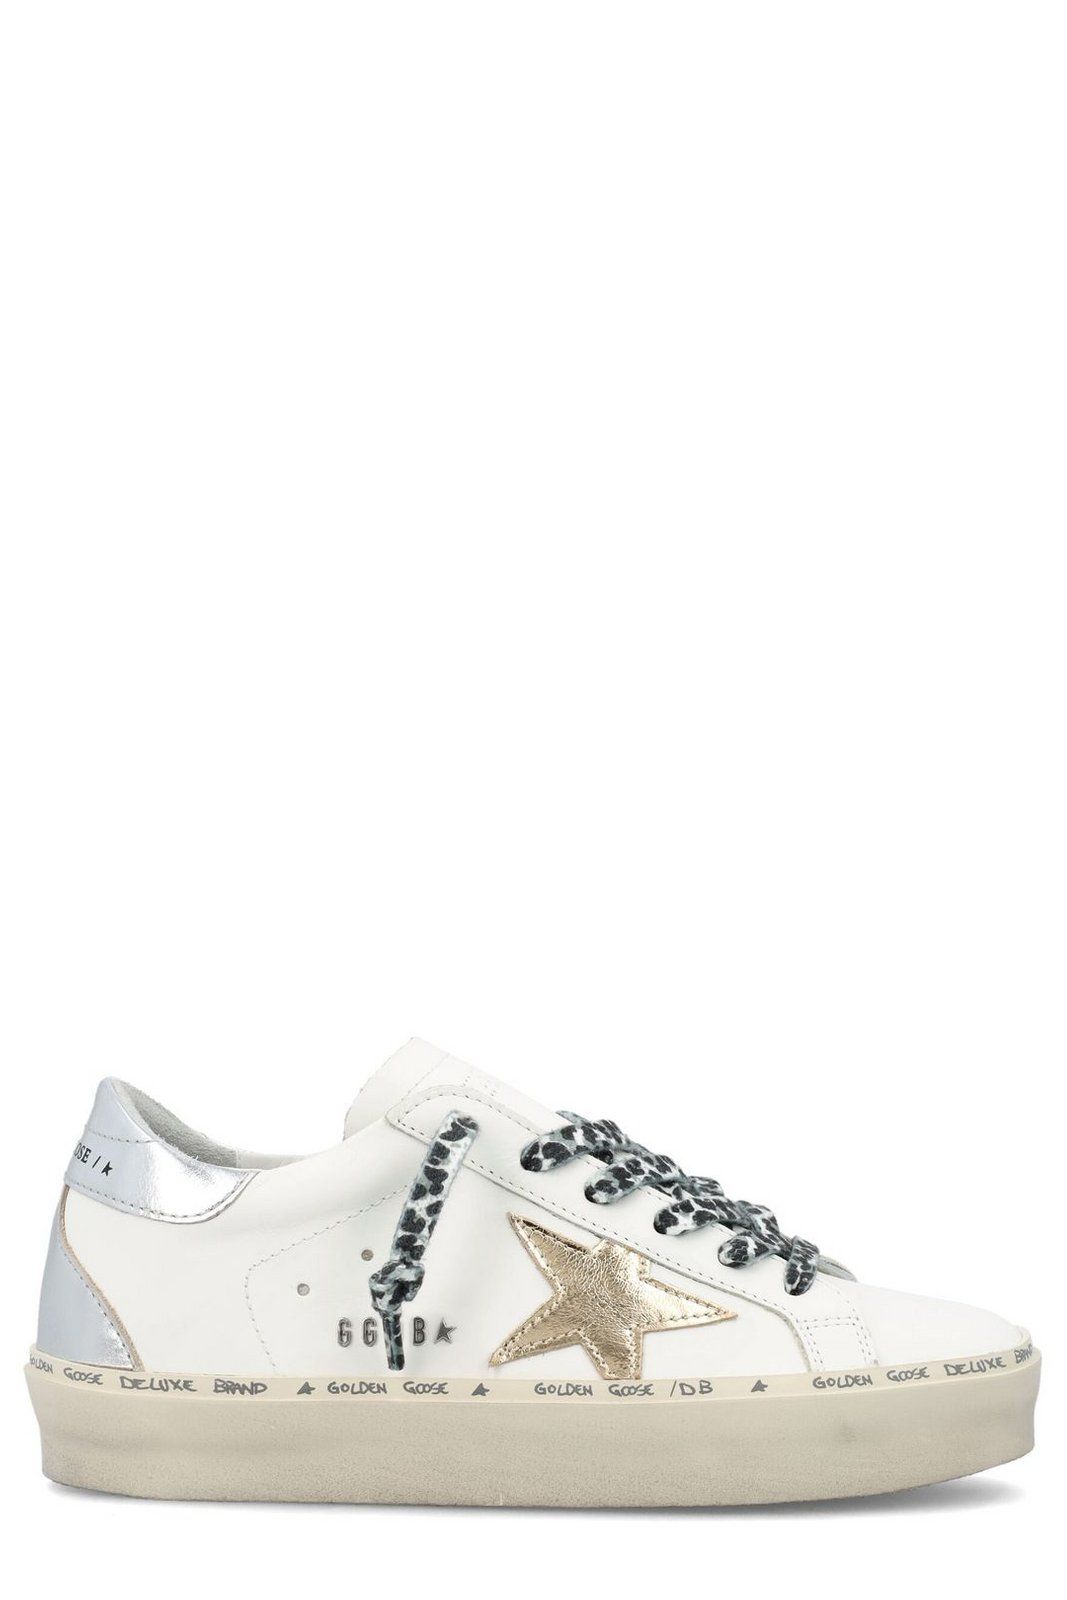 Golden Goose Deluxe Brand Star Patch Low-Top Sneakers | Cettire Global